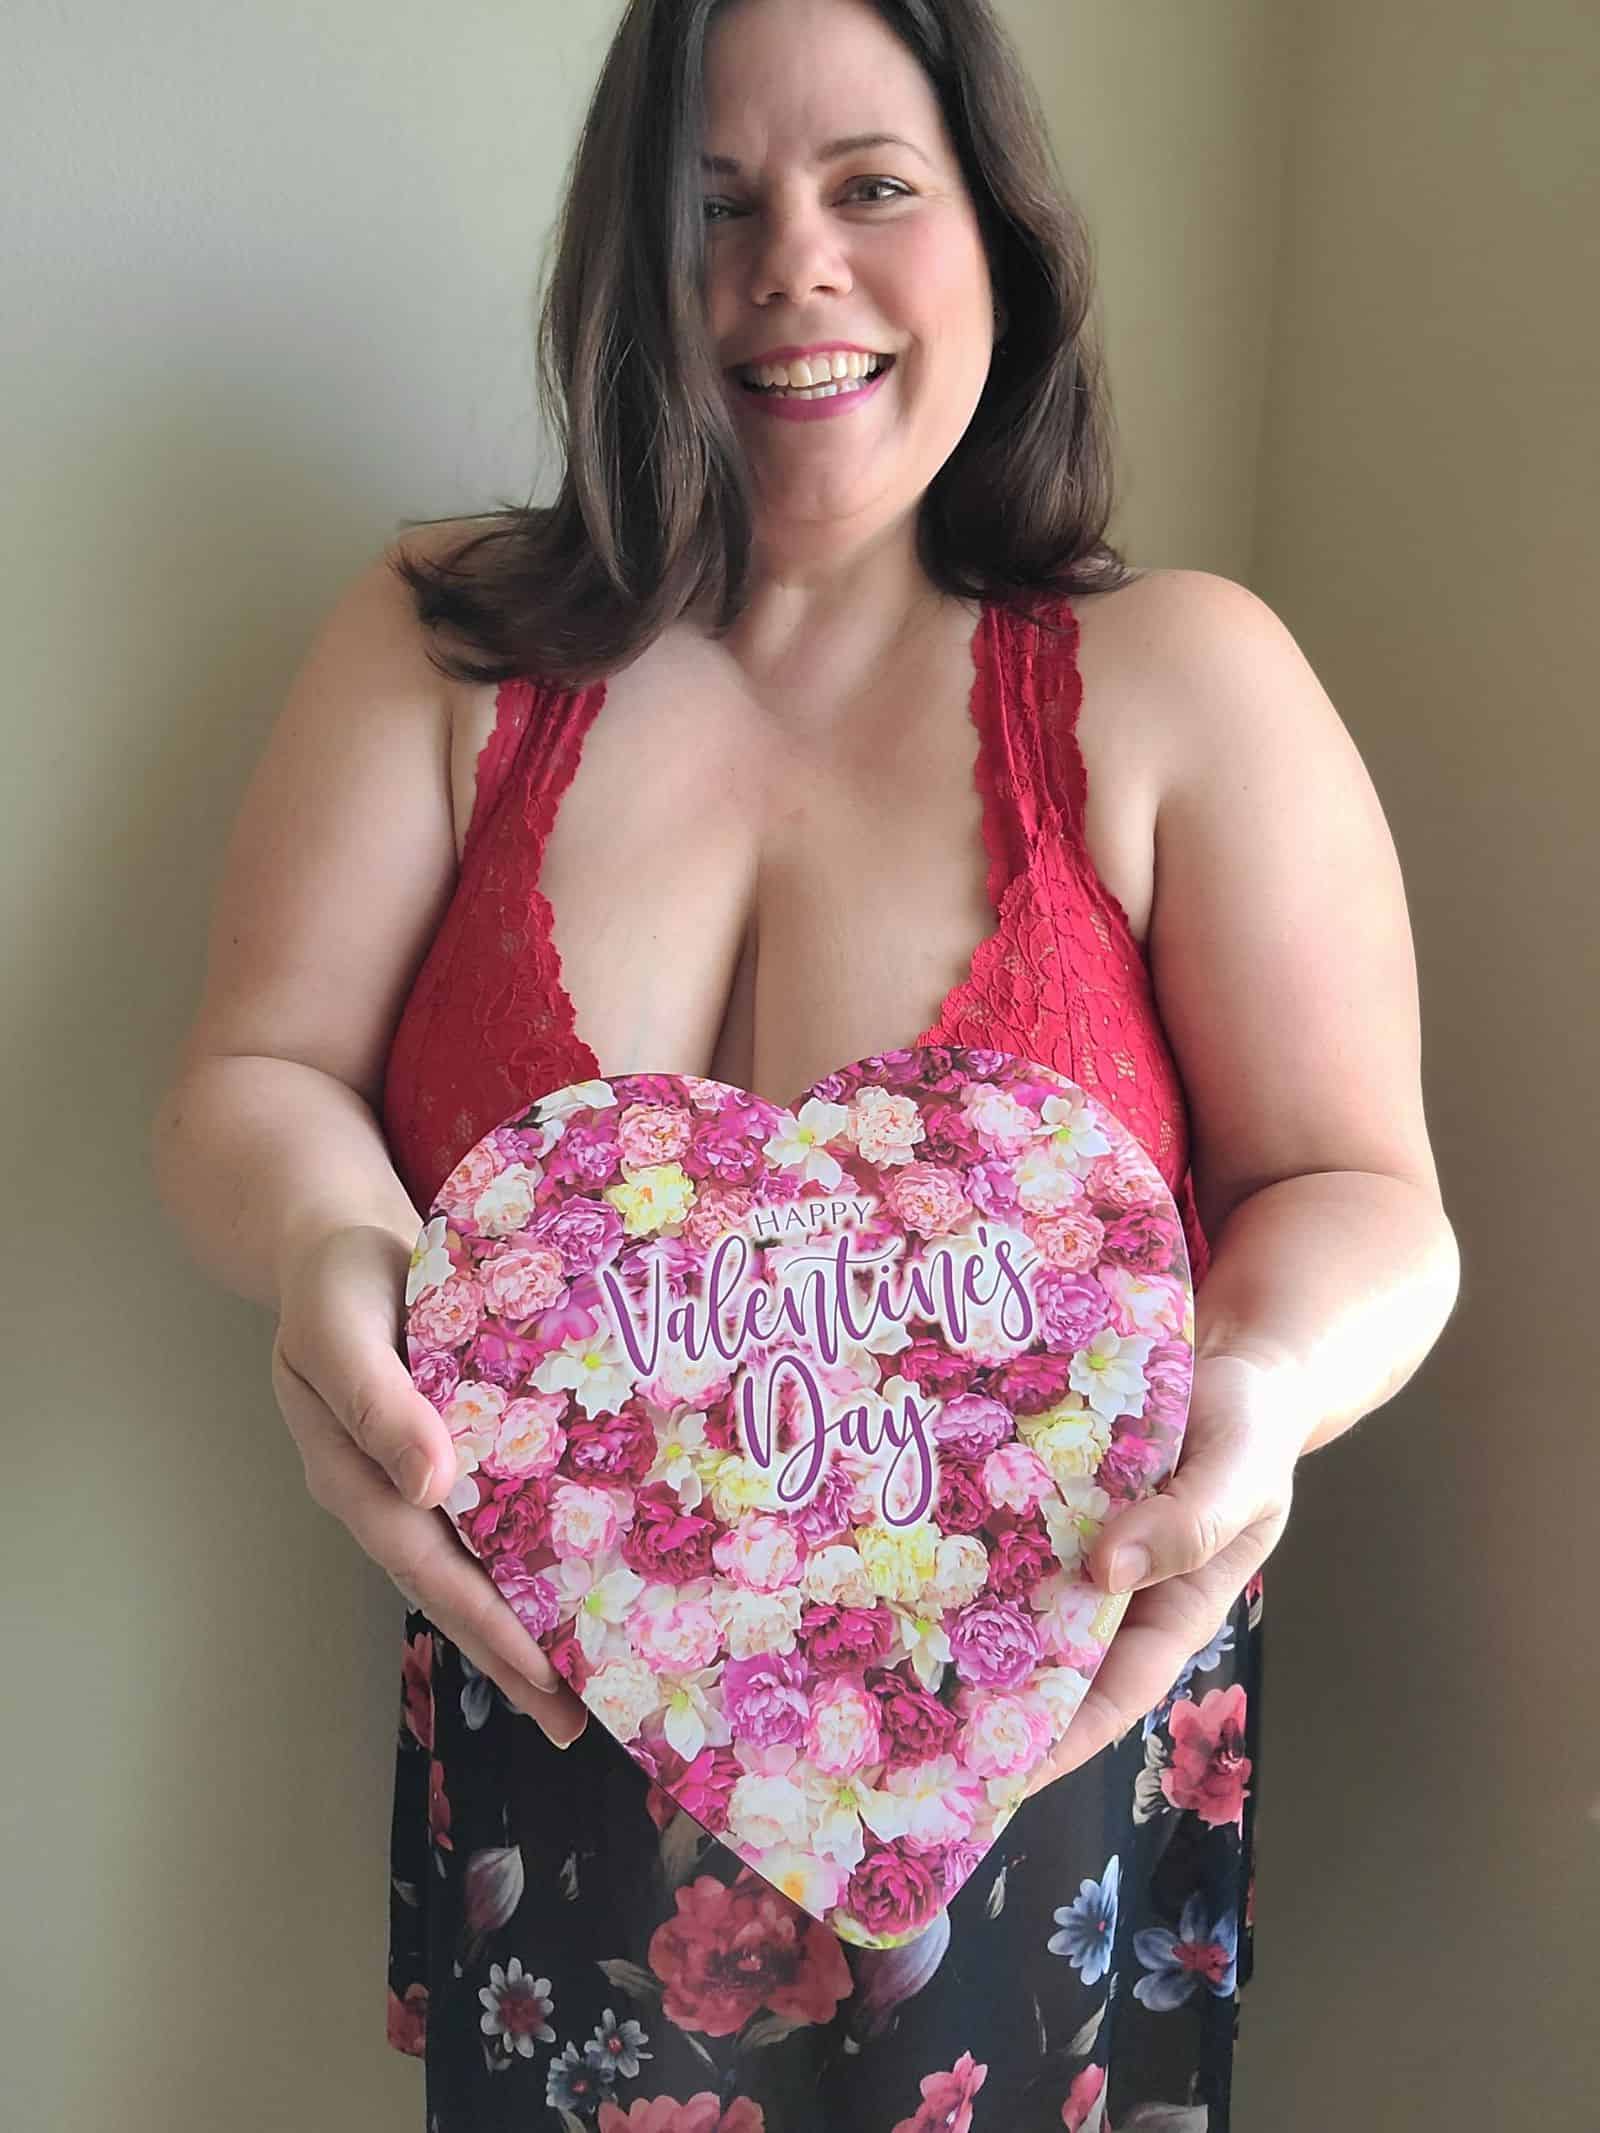 Sew What Do I Wear? – Valentines Lingerie image